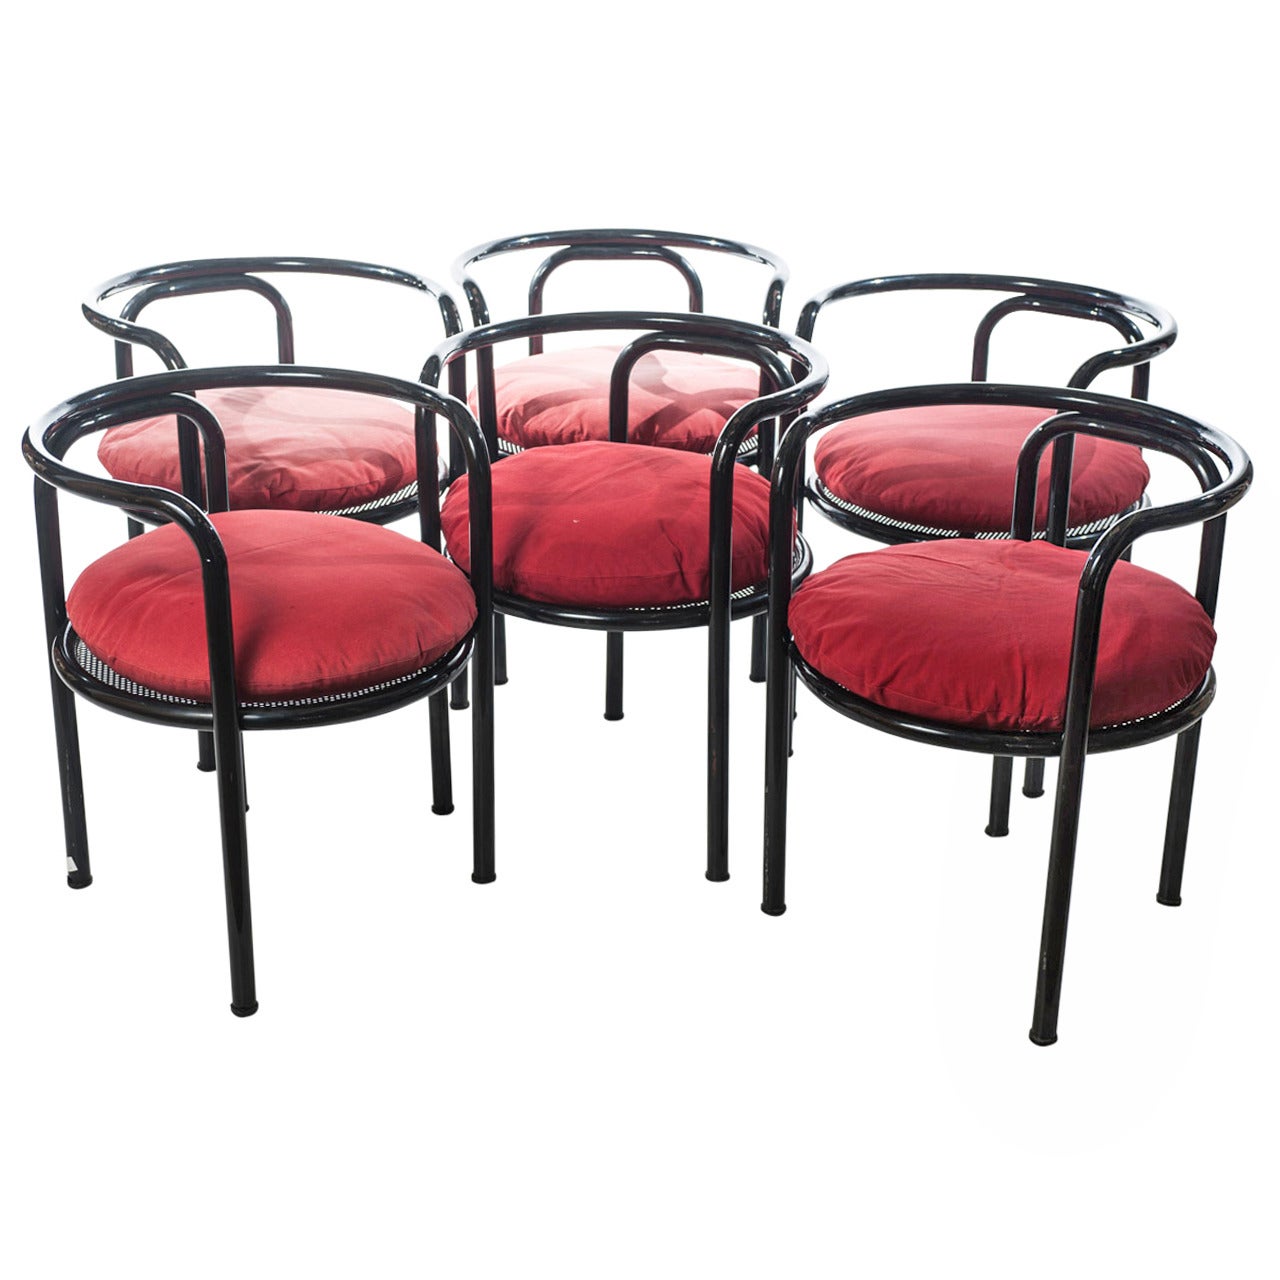 Set of Six Chairs Locus Solus by Gae Aulenti for Poltronova